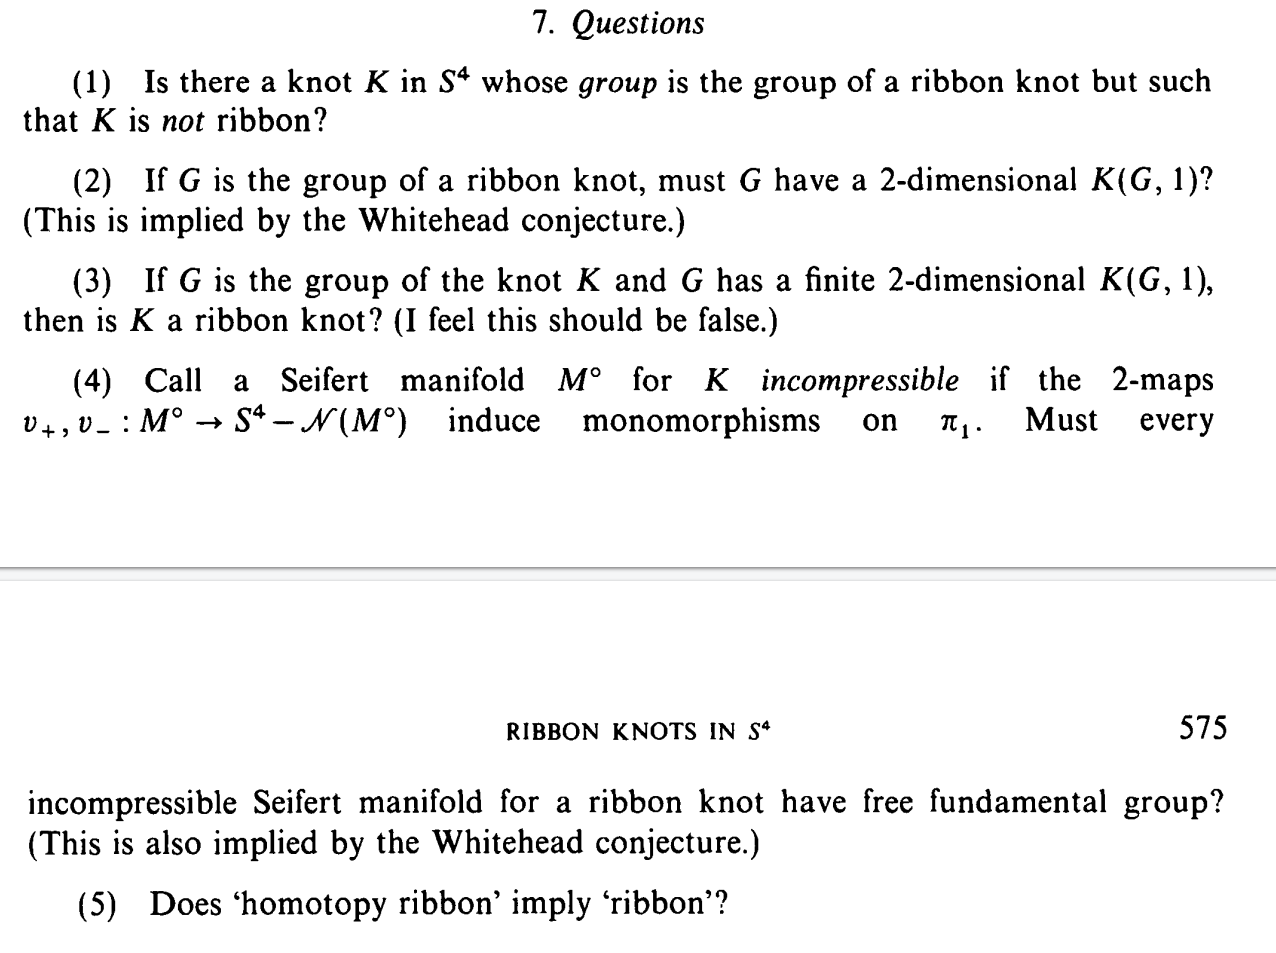 Questions from [Cochran] Ribbon Knots in S^4 (1983)